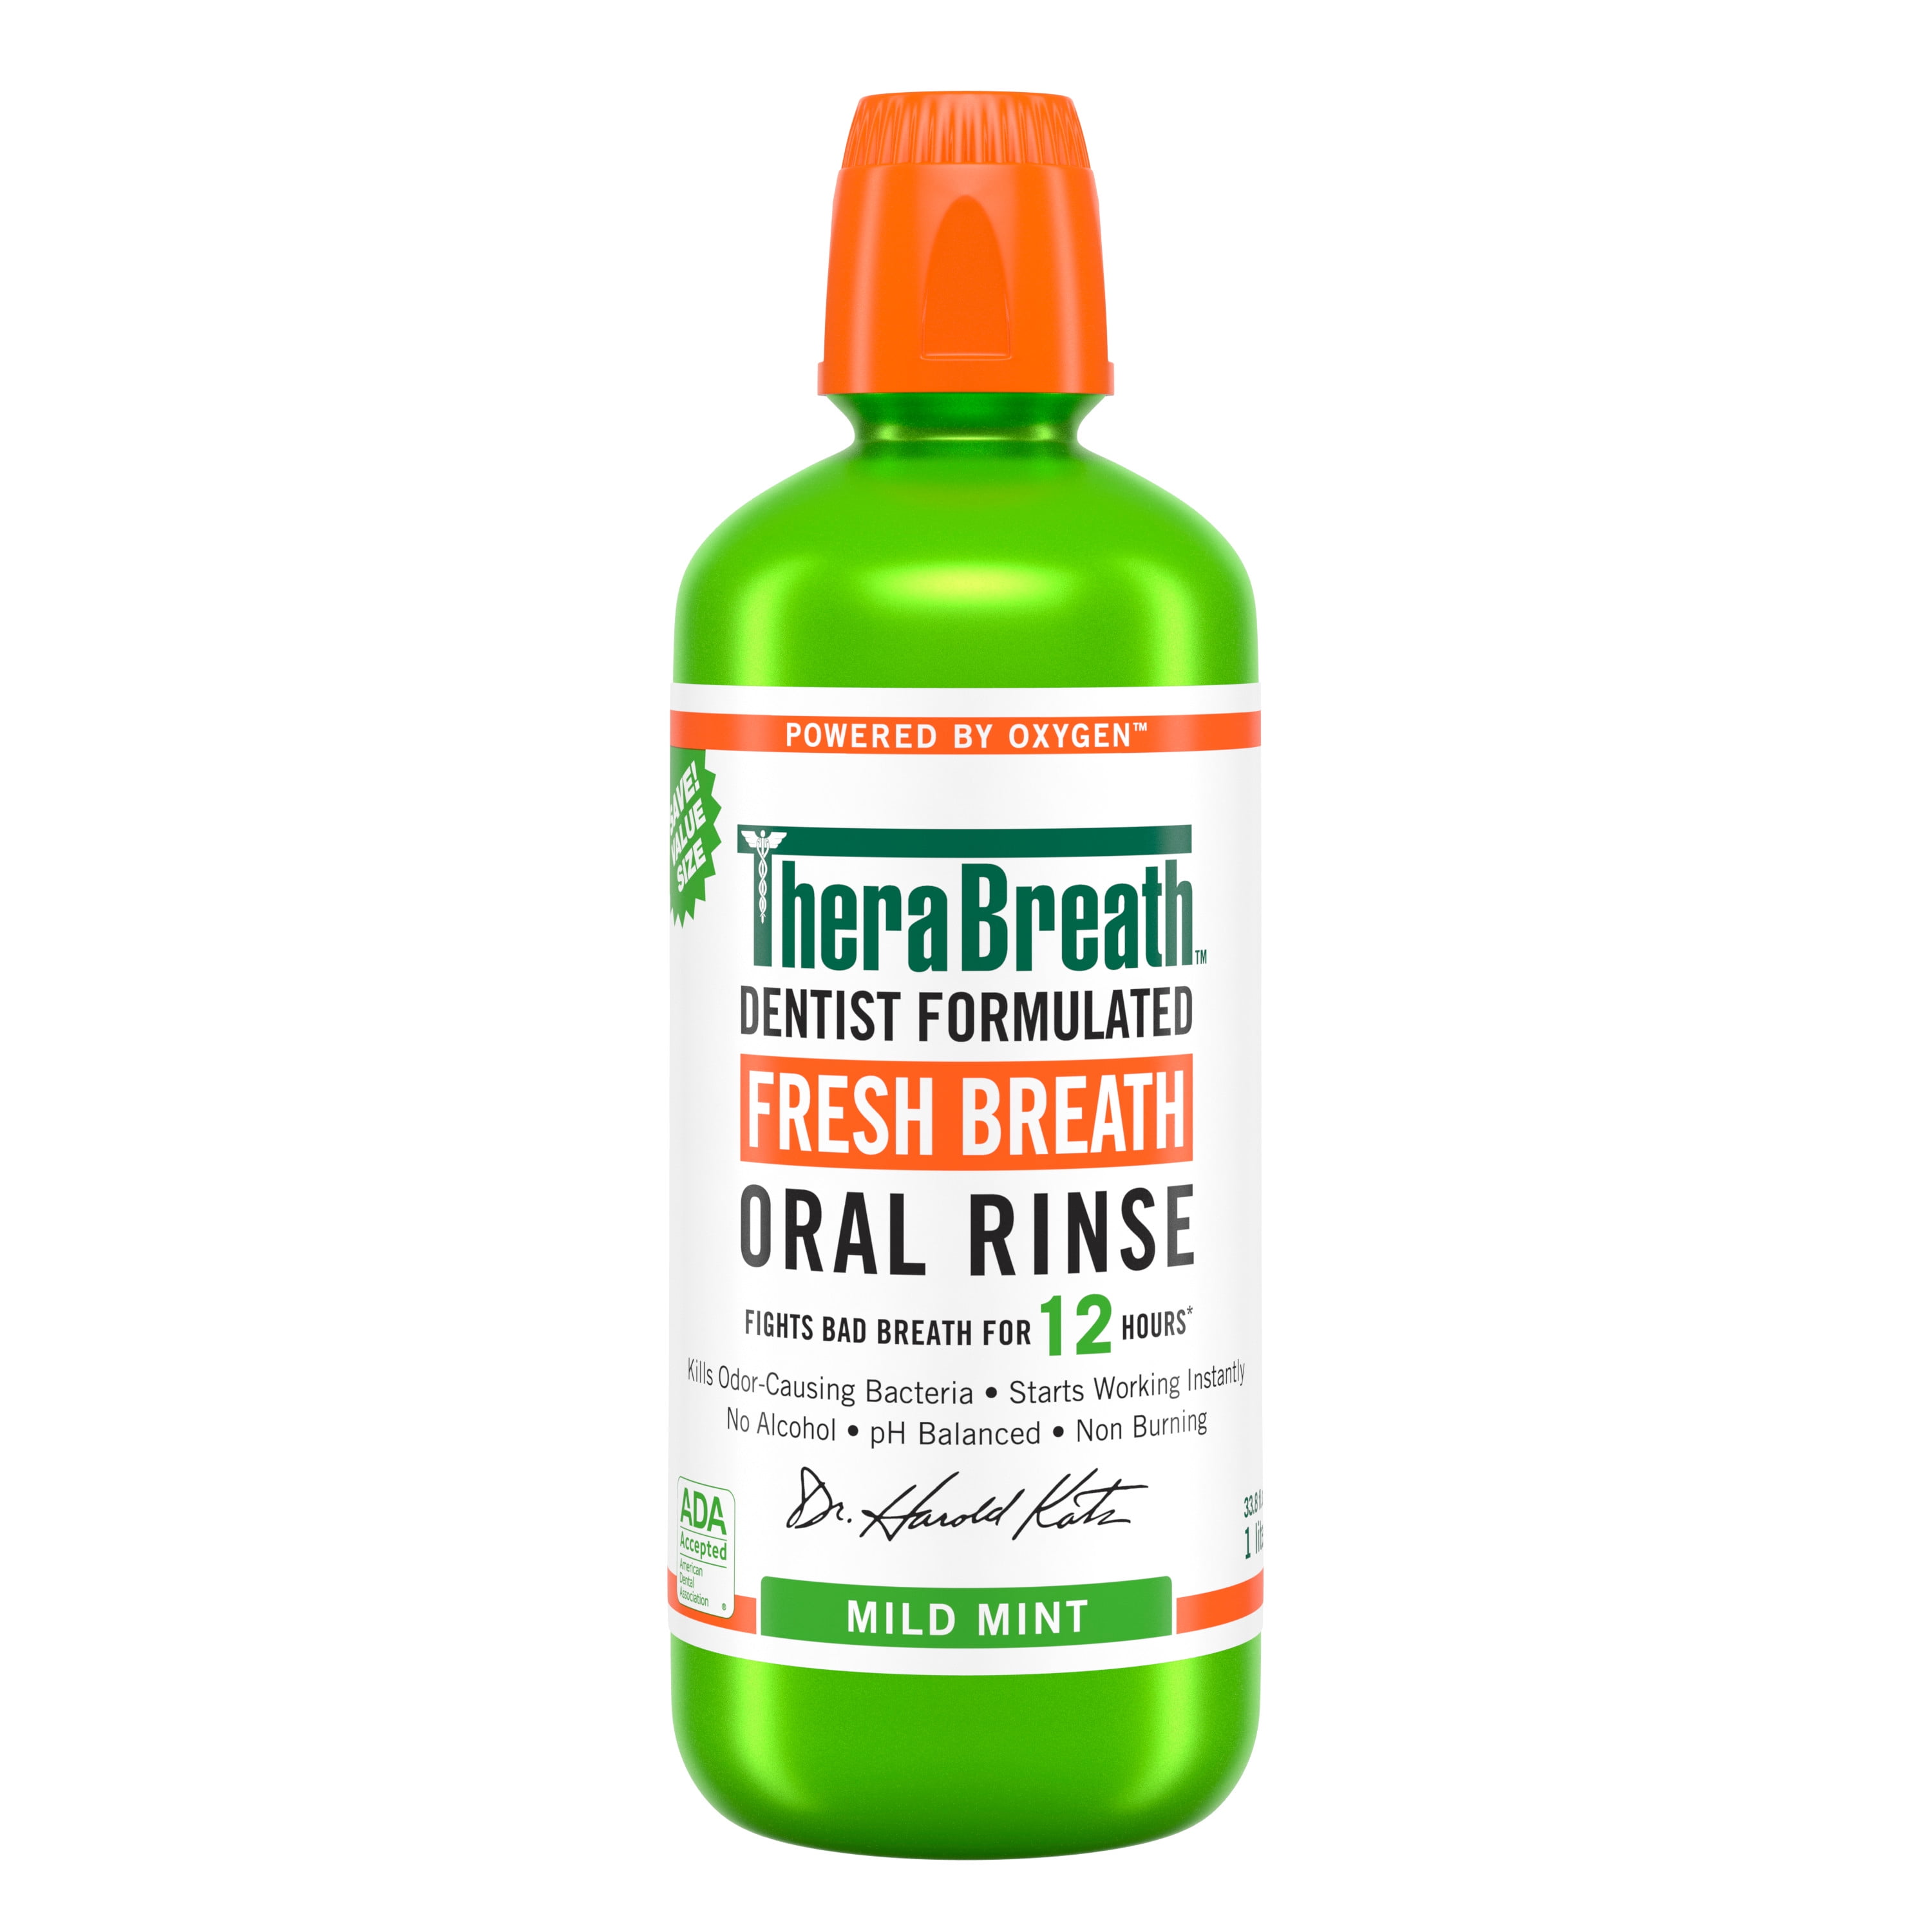 LISTERINE® Clinical Solutions Breath Defense Mouthwash for Bad